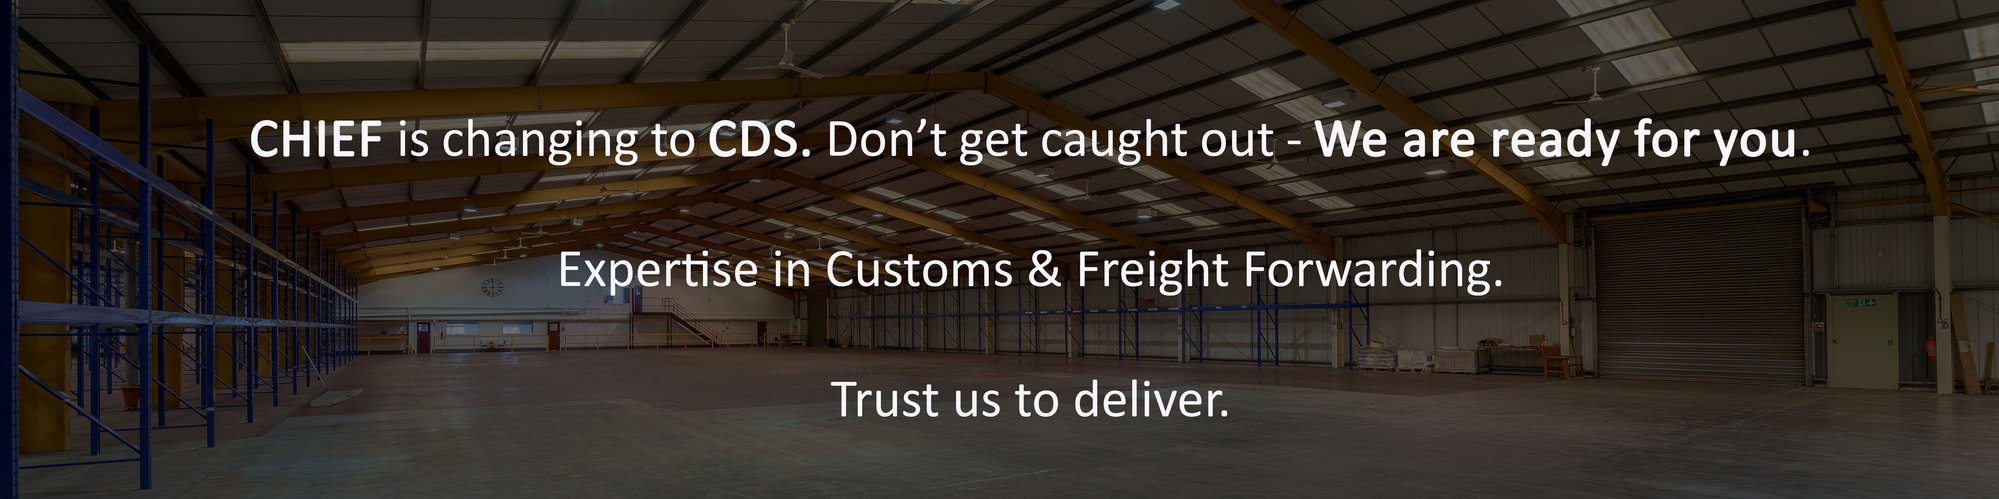 Customs Handling of Import and Export Freight is Changing to CDS. Customs Clearance and Customs Brokerage we excel at all things Customs. With our own  Bonded Warehouse and customs deferment account we cover all your freight needs for import and export.